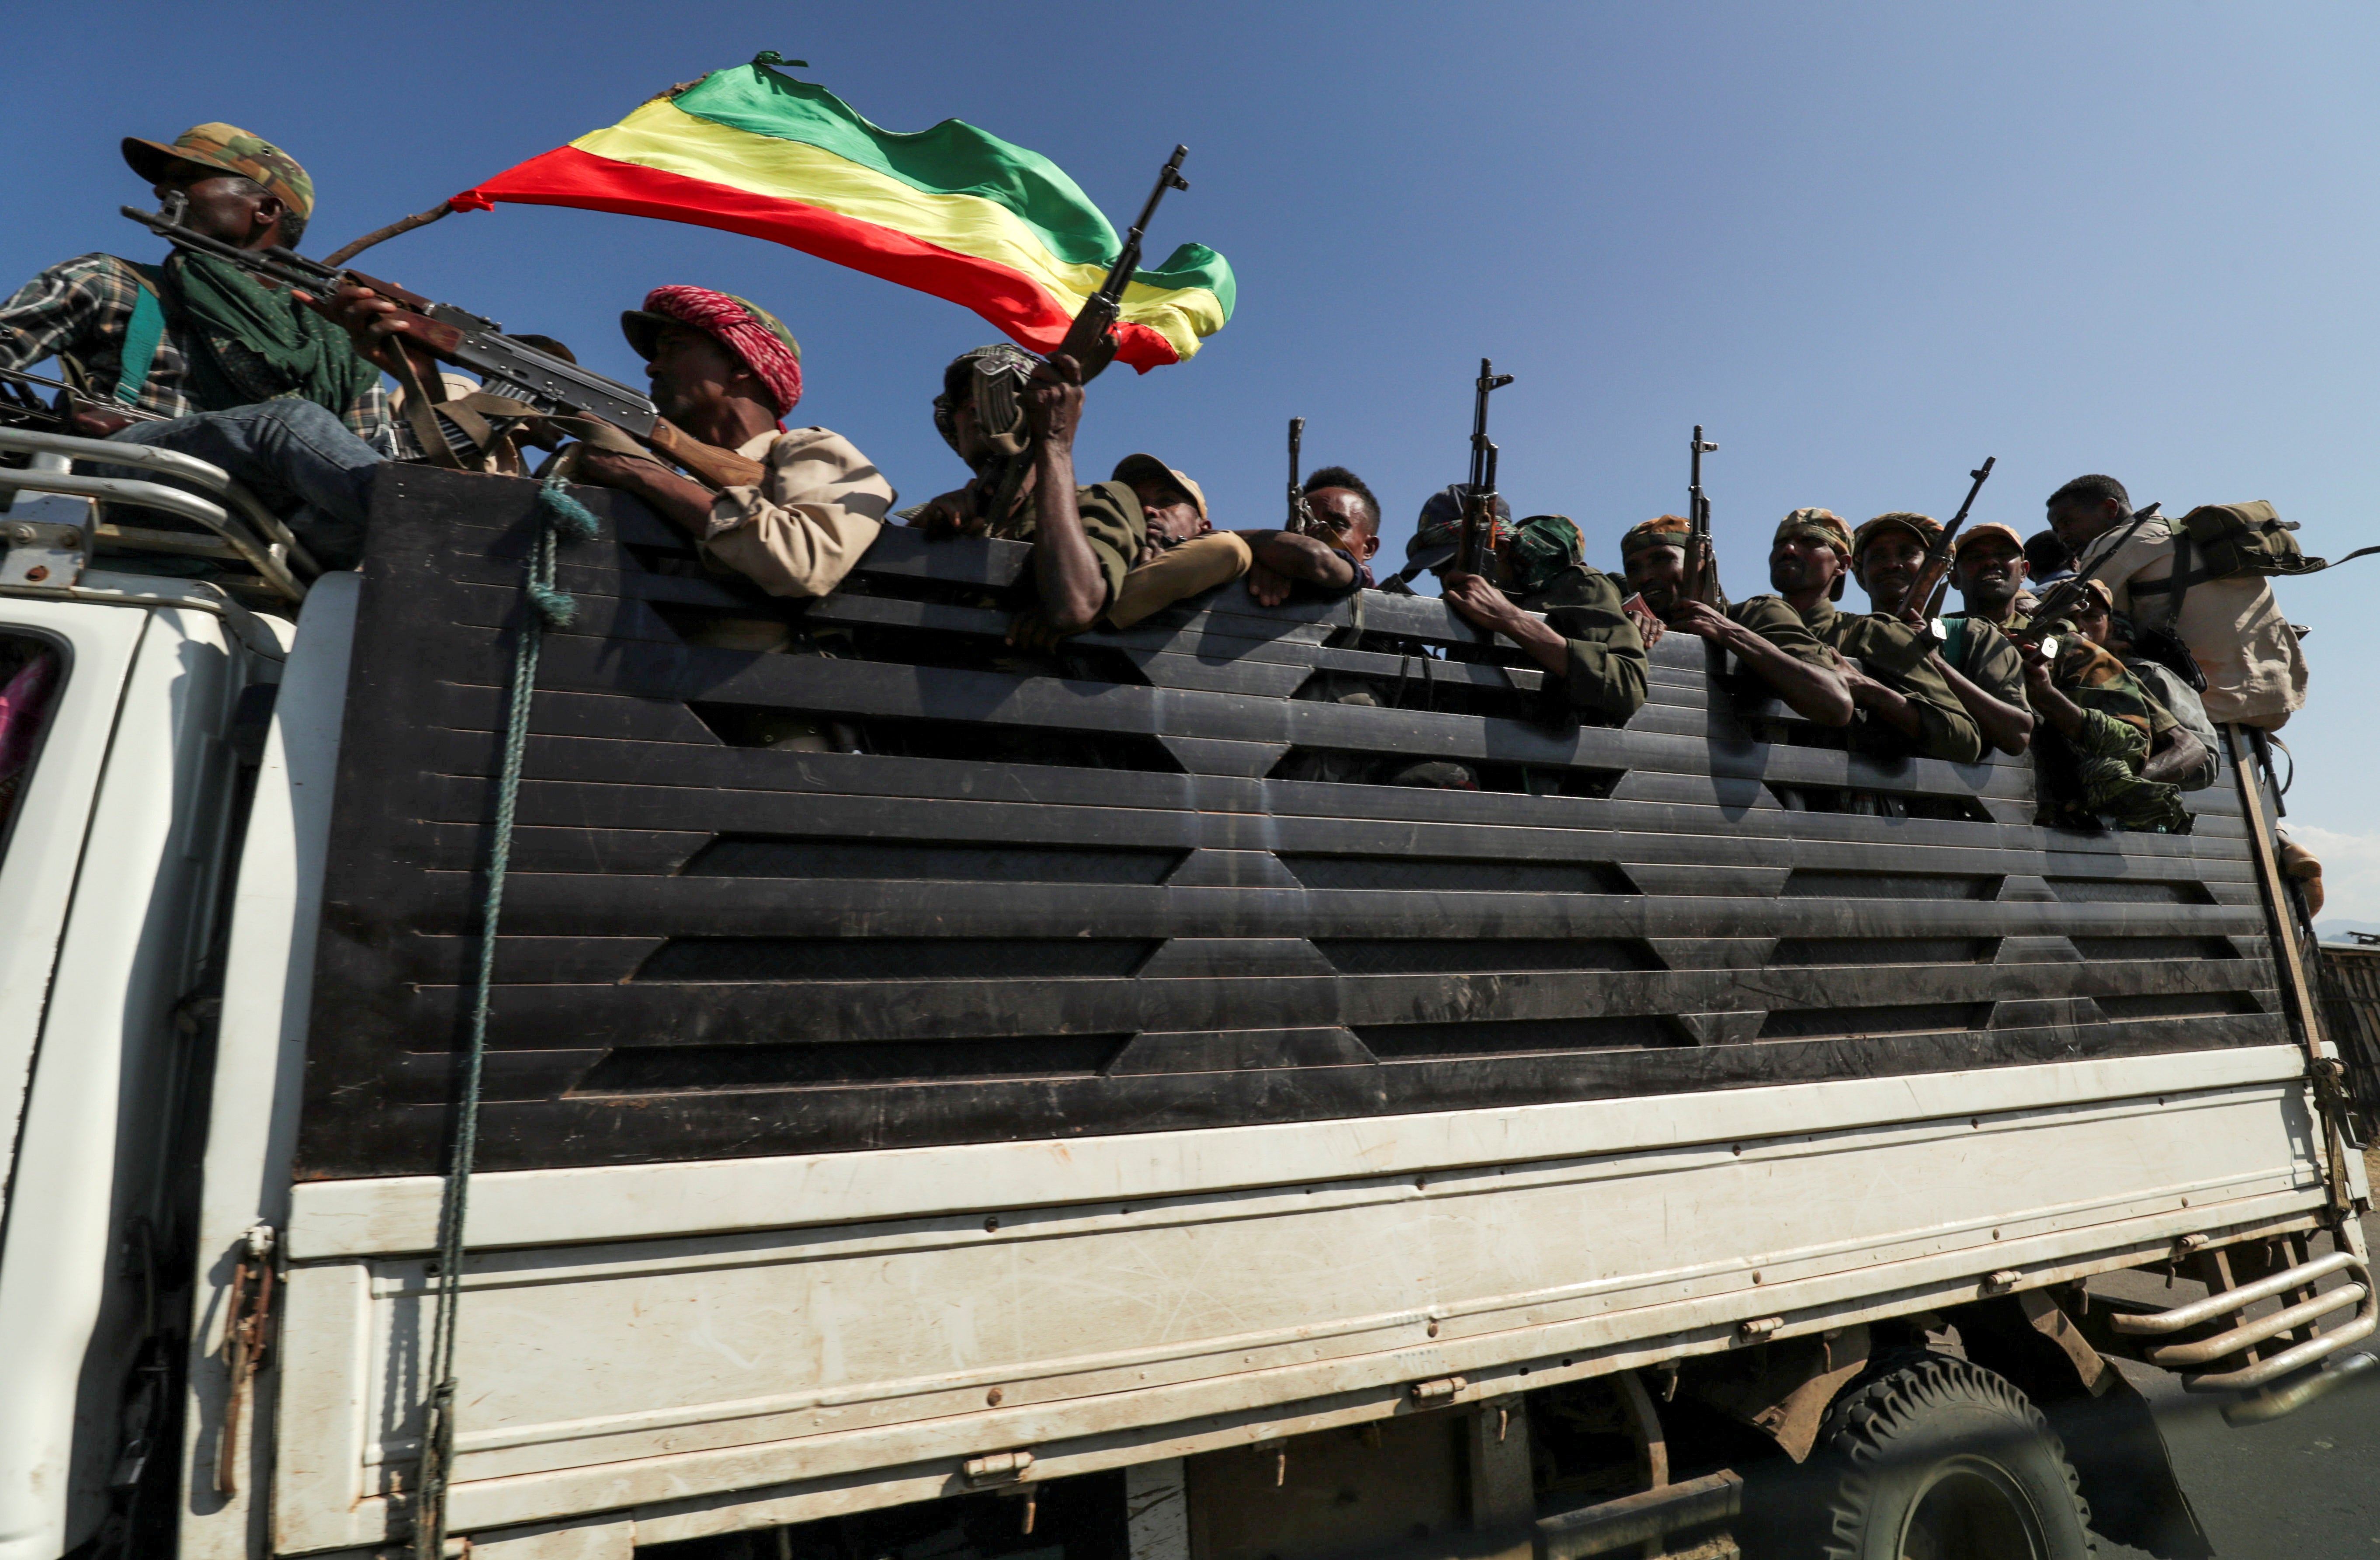 Members of Amhara region militias ride on their truck as they head to face the Tigray People’s Liberation Front on 9 November